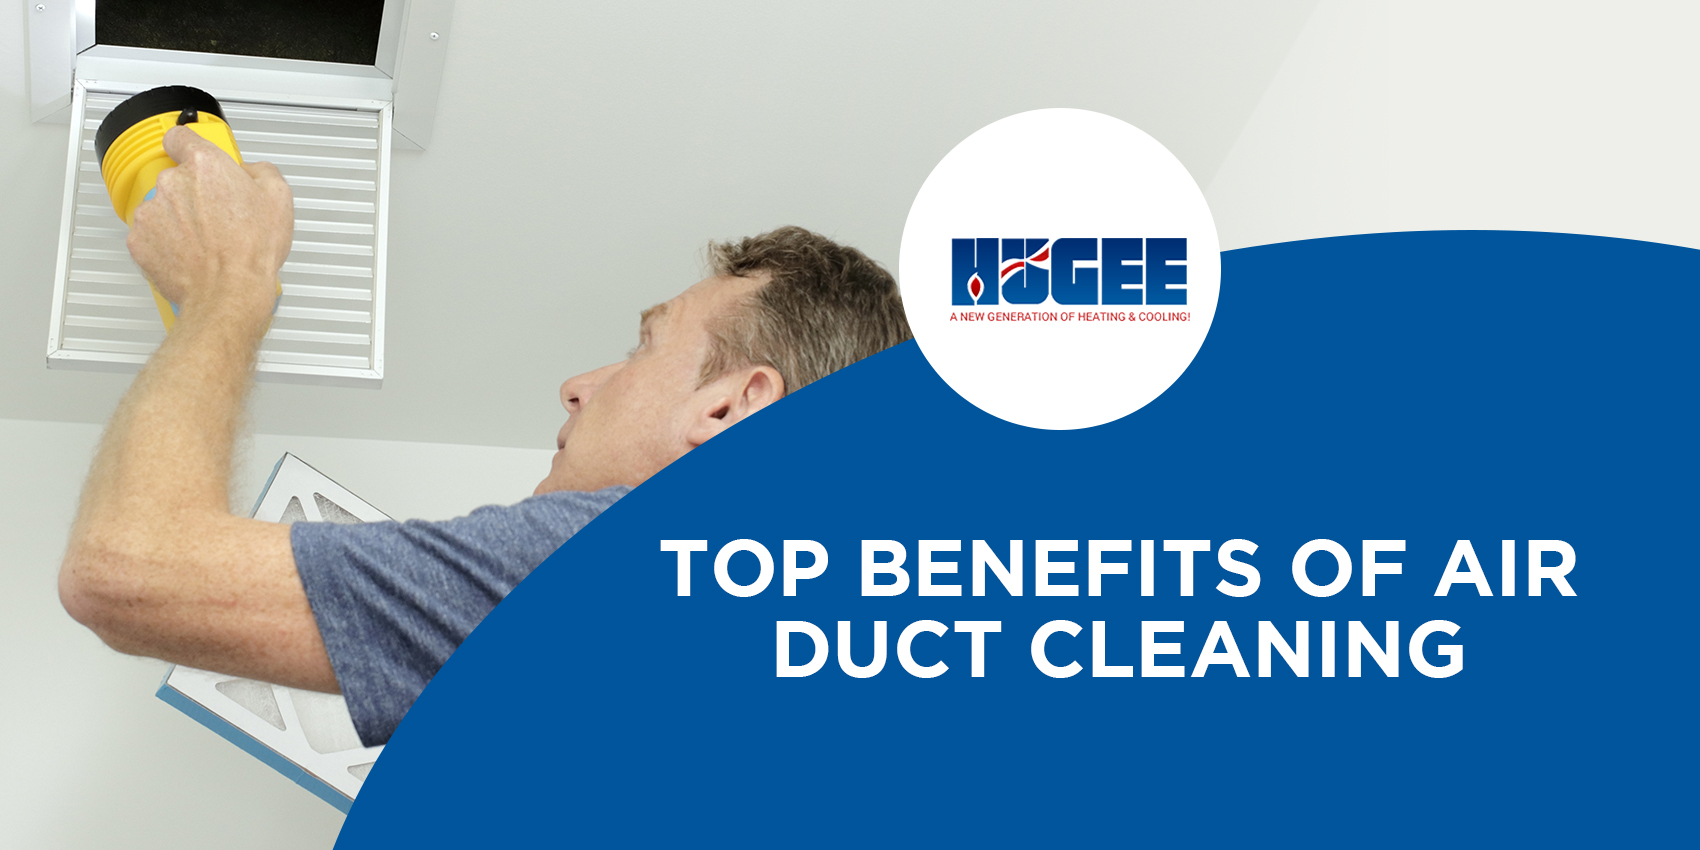 Top Benefits of Air Duct Cleaning